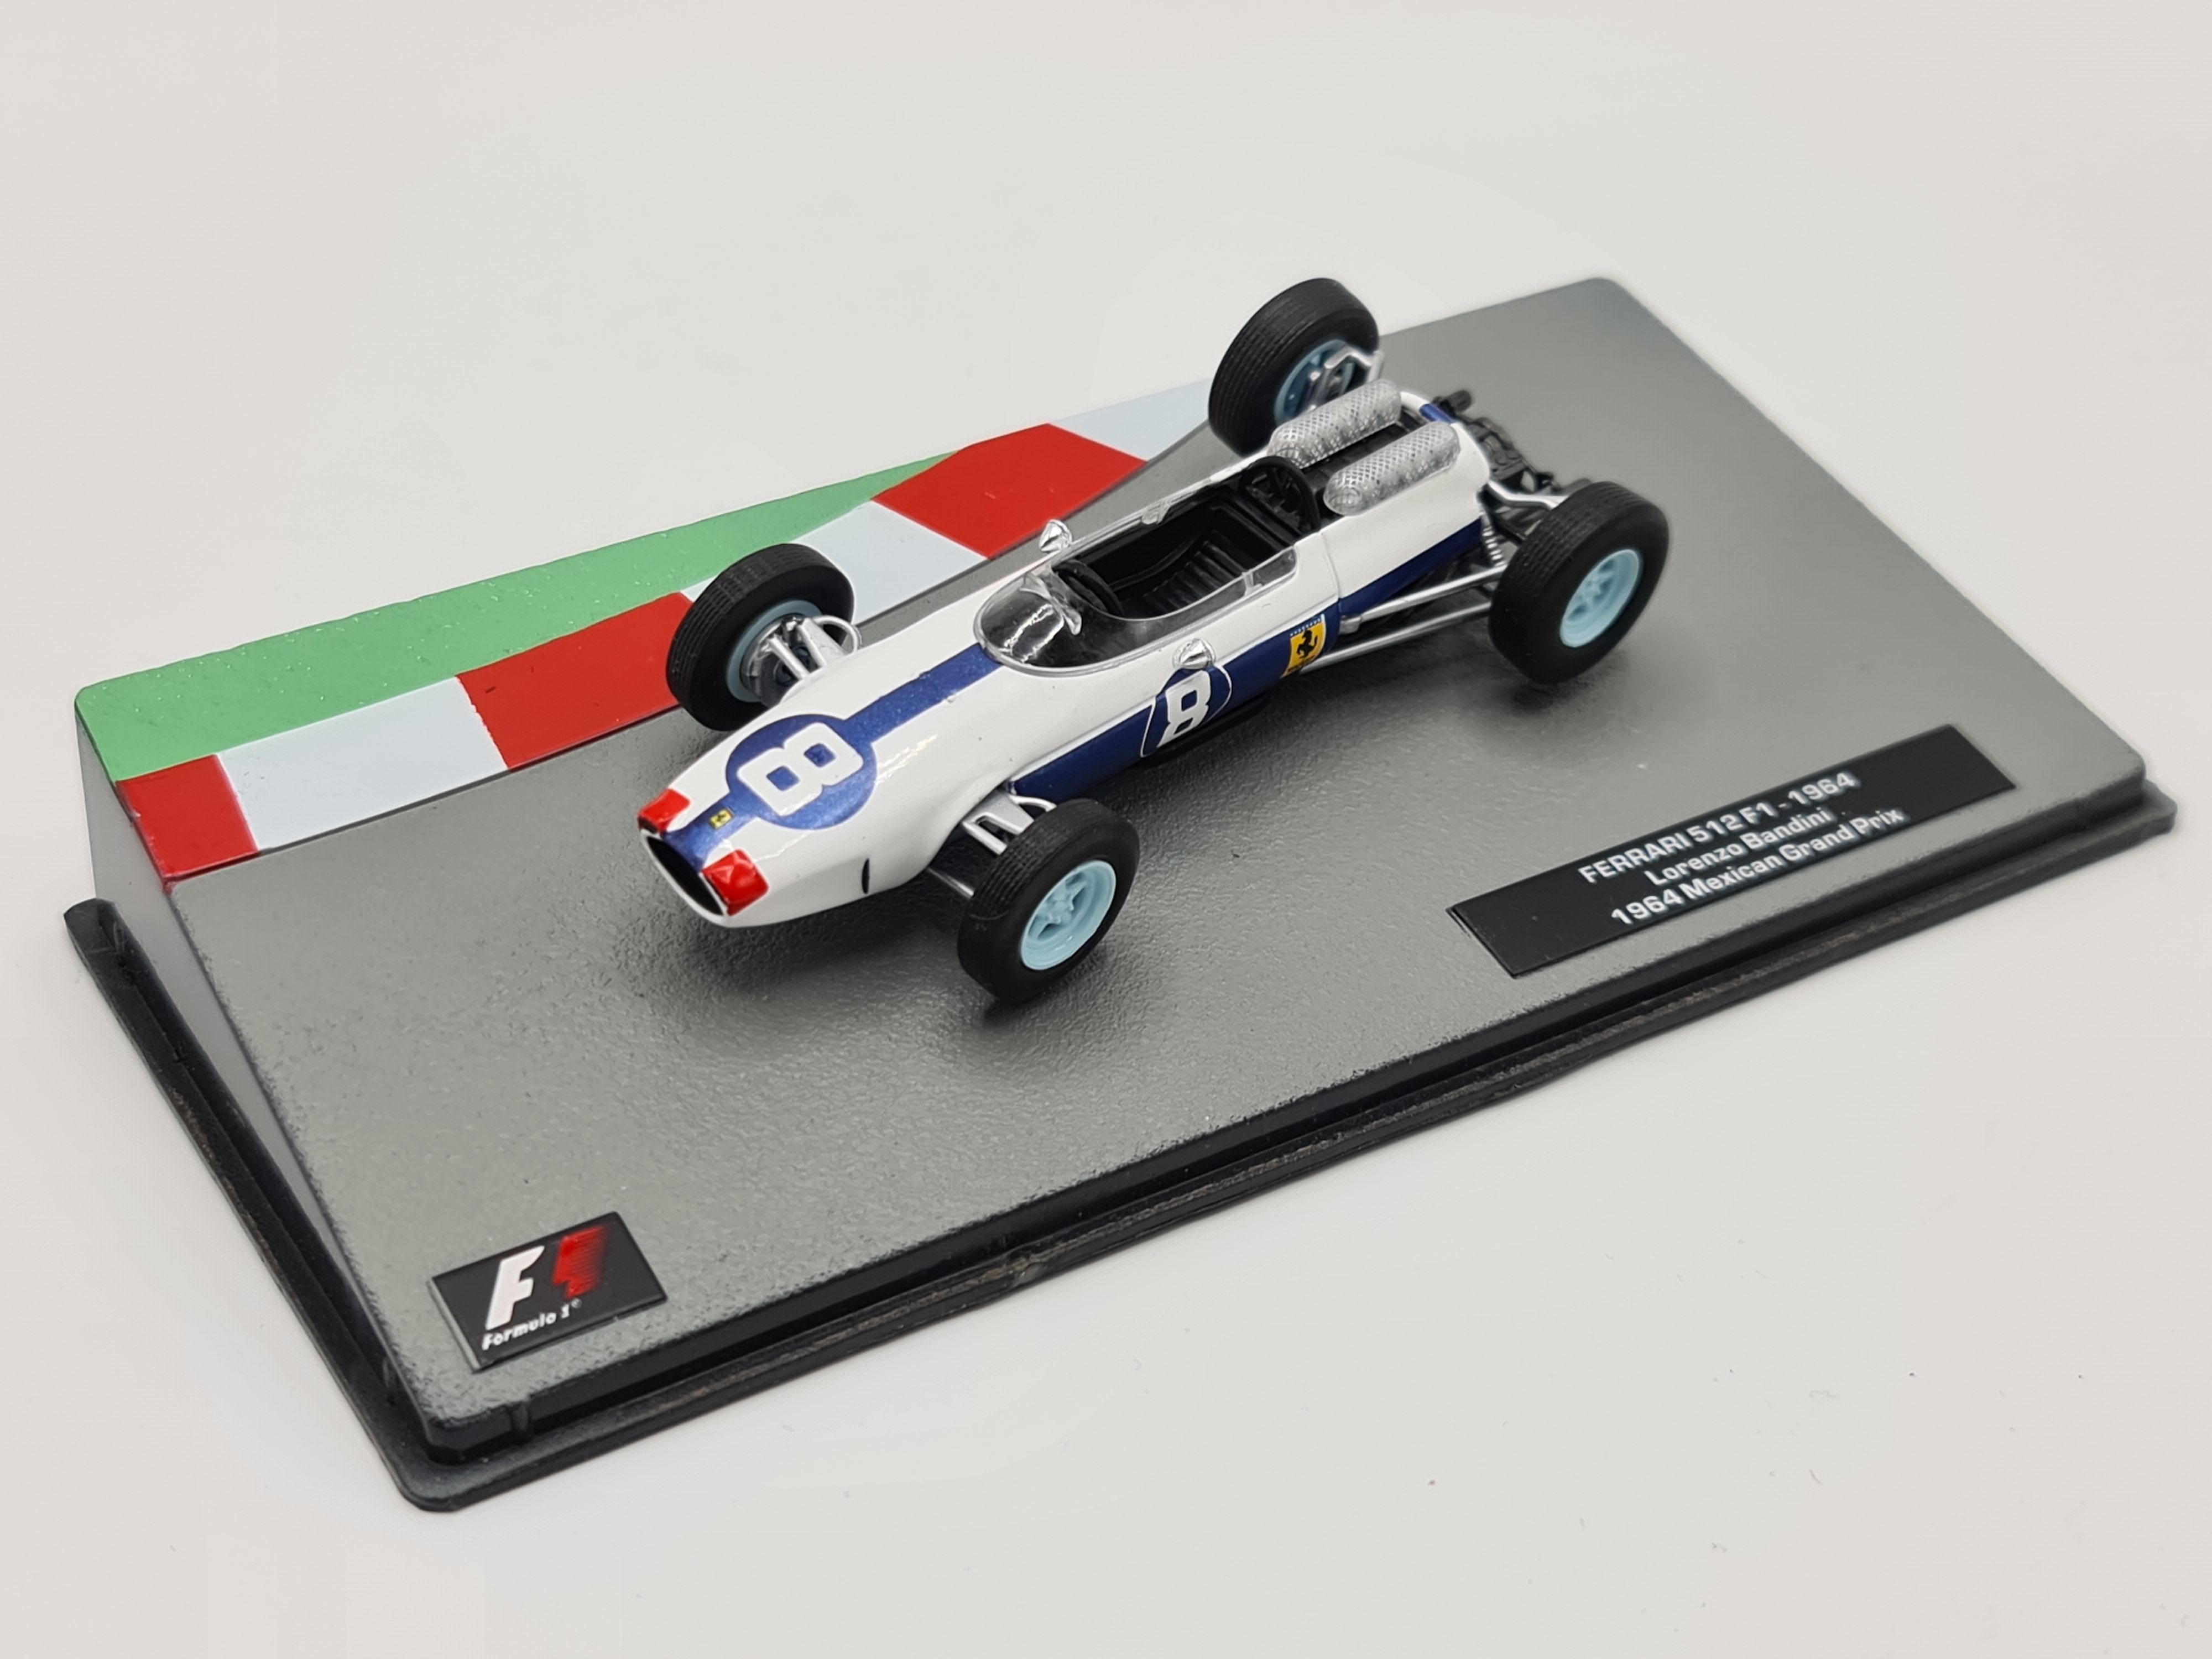 Collectable Model 1:43 Scale Details about   LORENZO BANDINI Ferrari 512 F1 Racing Car 1964 